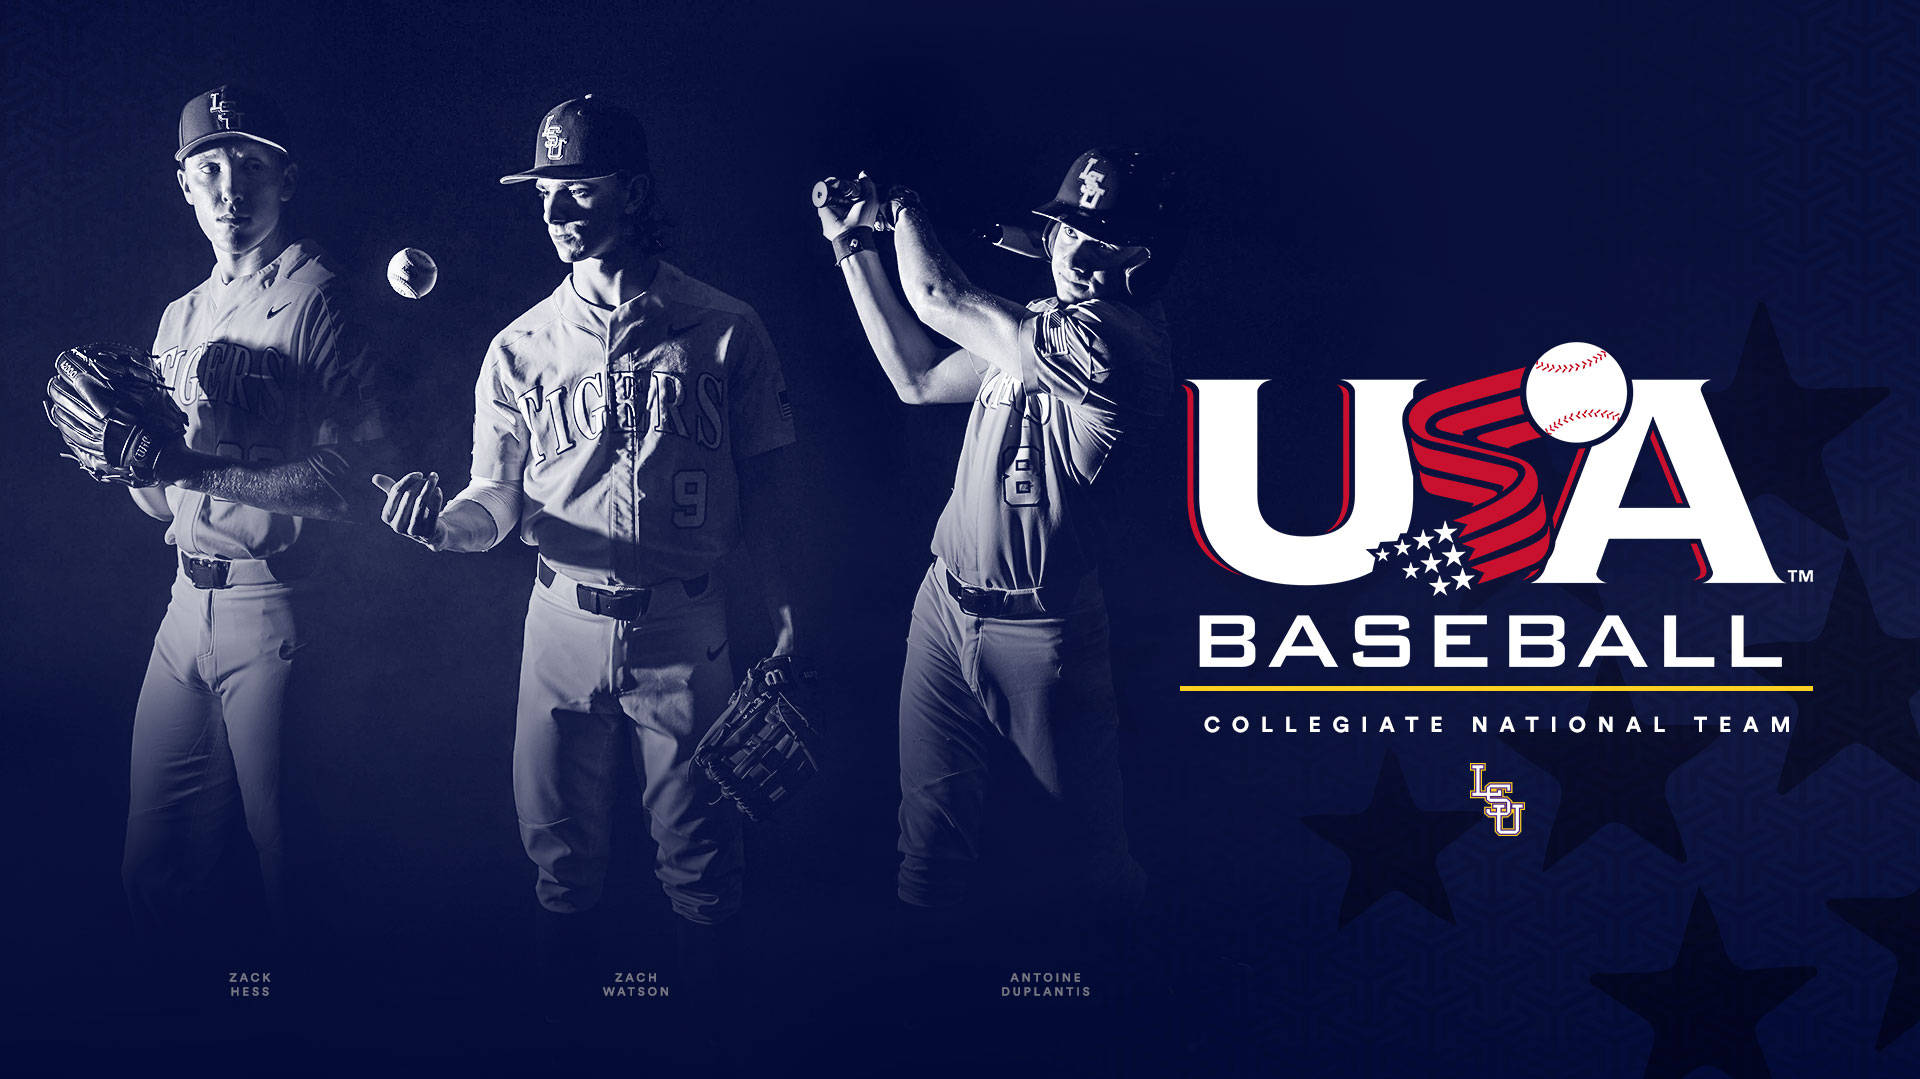 Three Tigers Join Usa Baseball For Summer Tour Lsu